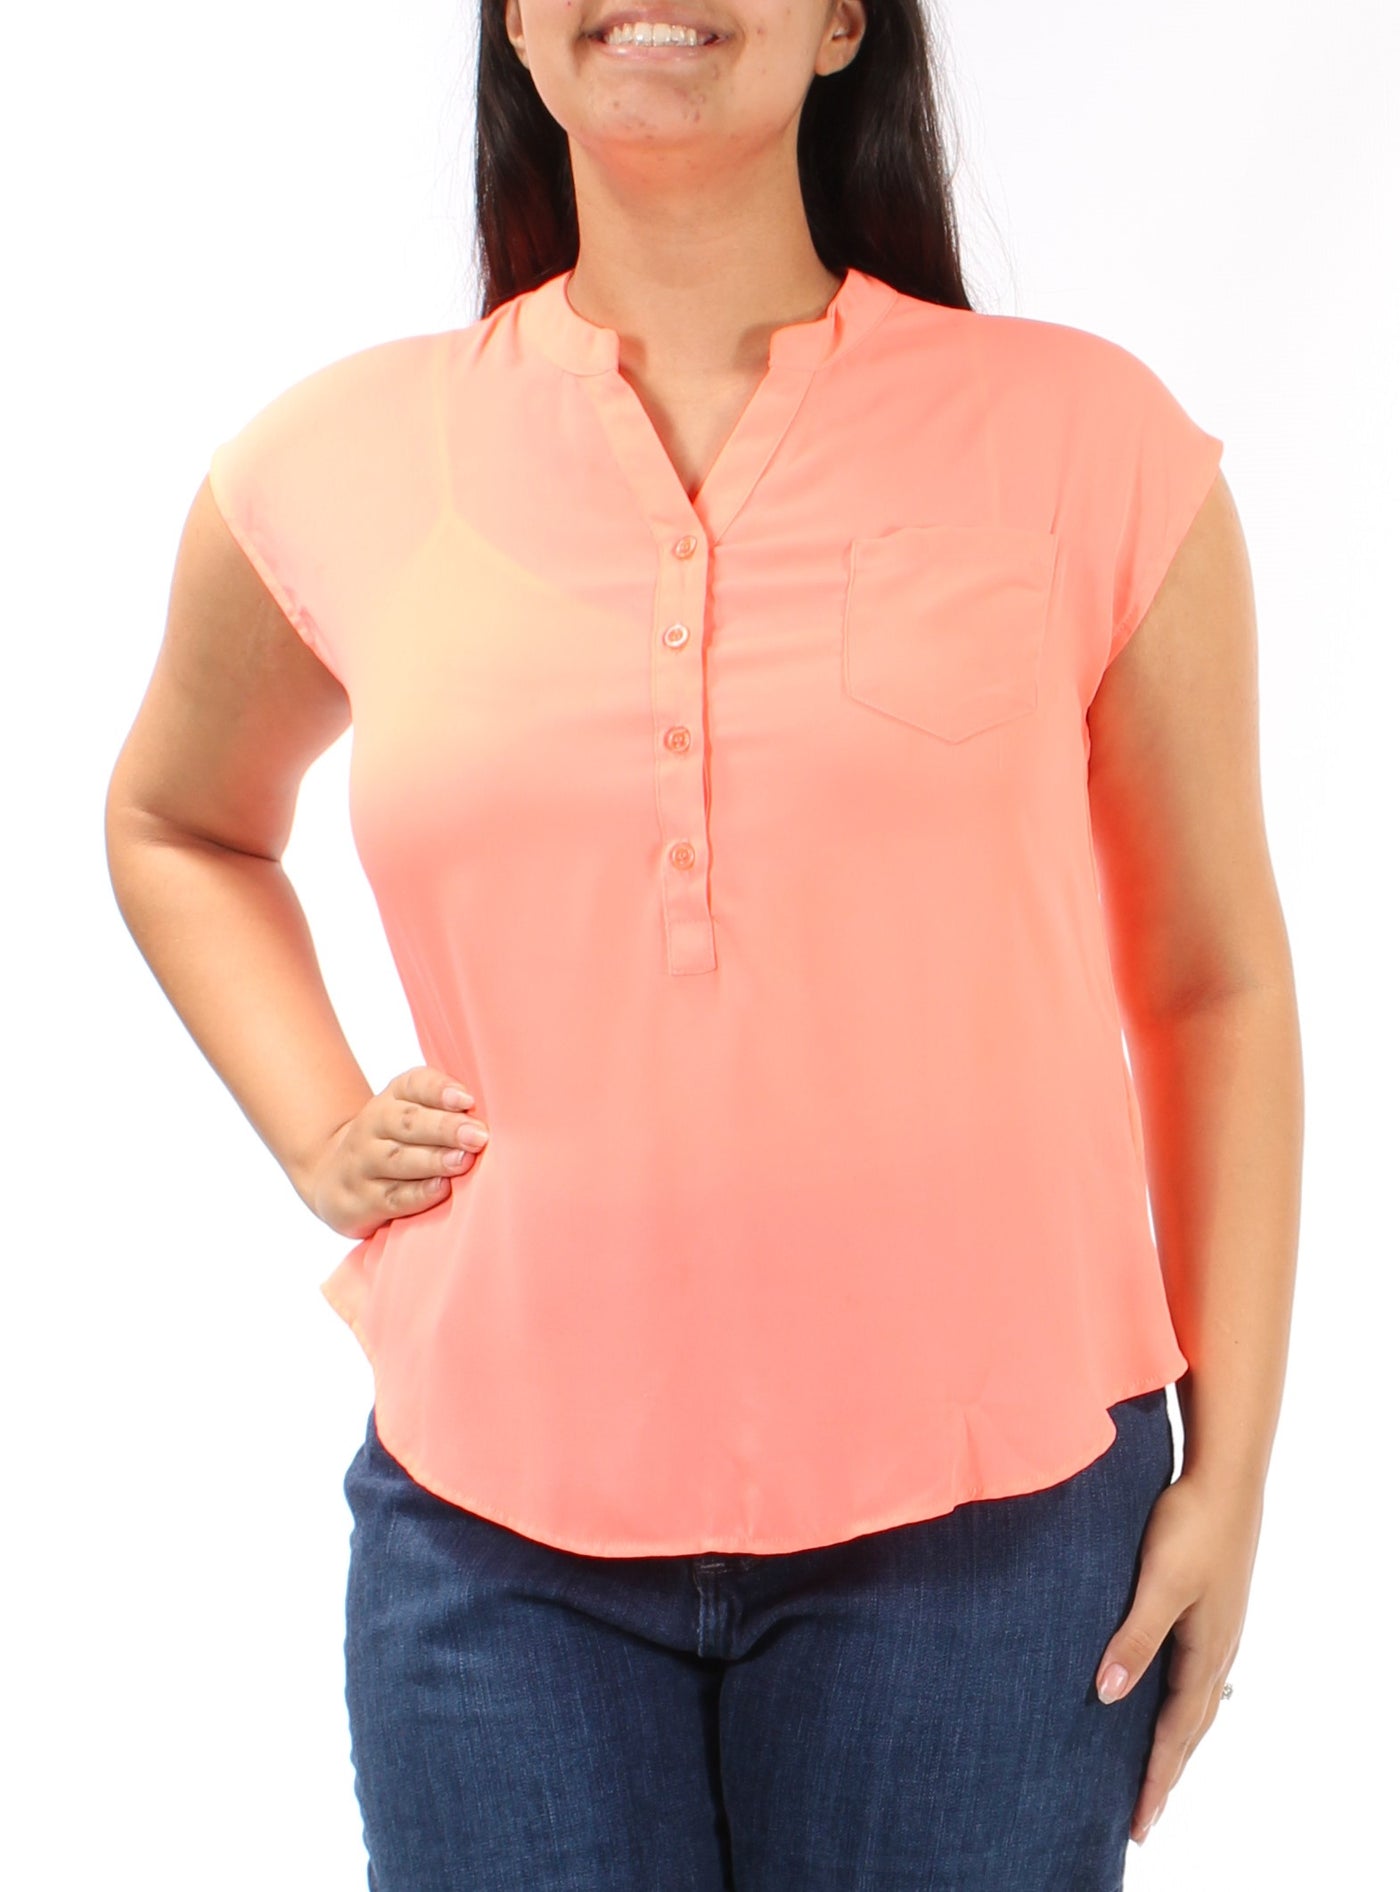 MINE Womens Coral Cap Sleeve V Neck Top